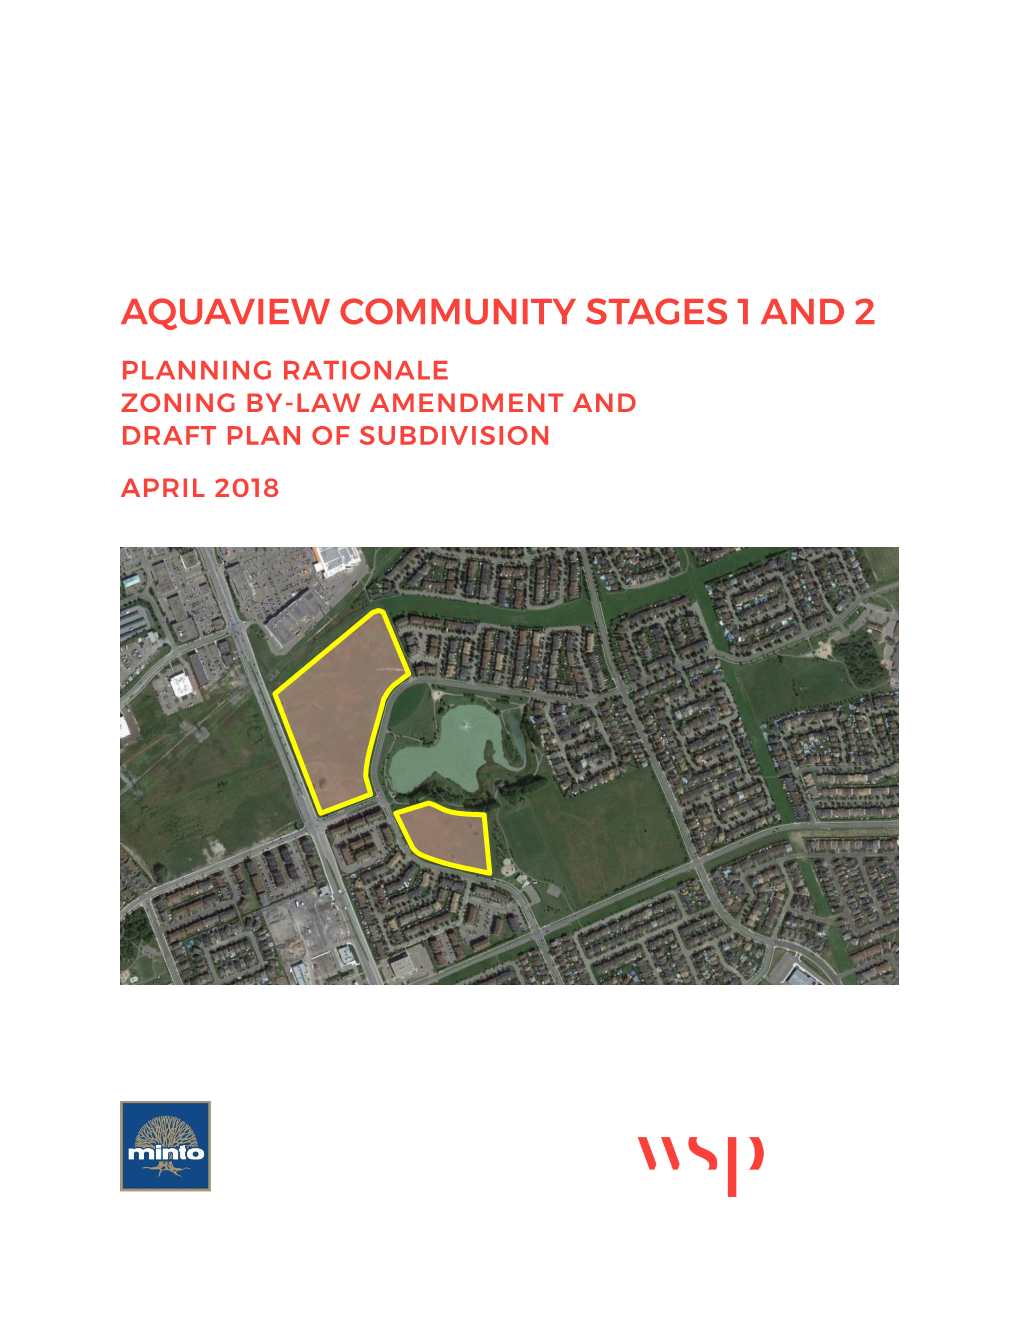 Aquaview Community Stages 1 and 2 Planning Rationale Zoning By-Law Amendment and Draft Plan of Subdivision April 2018